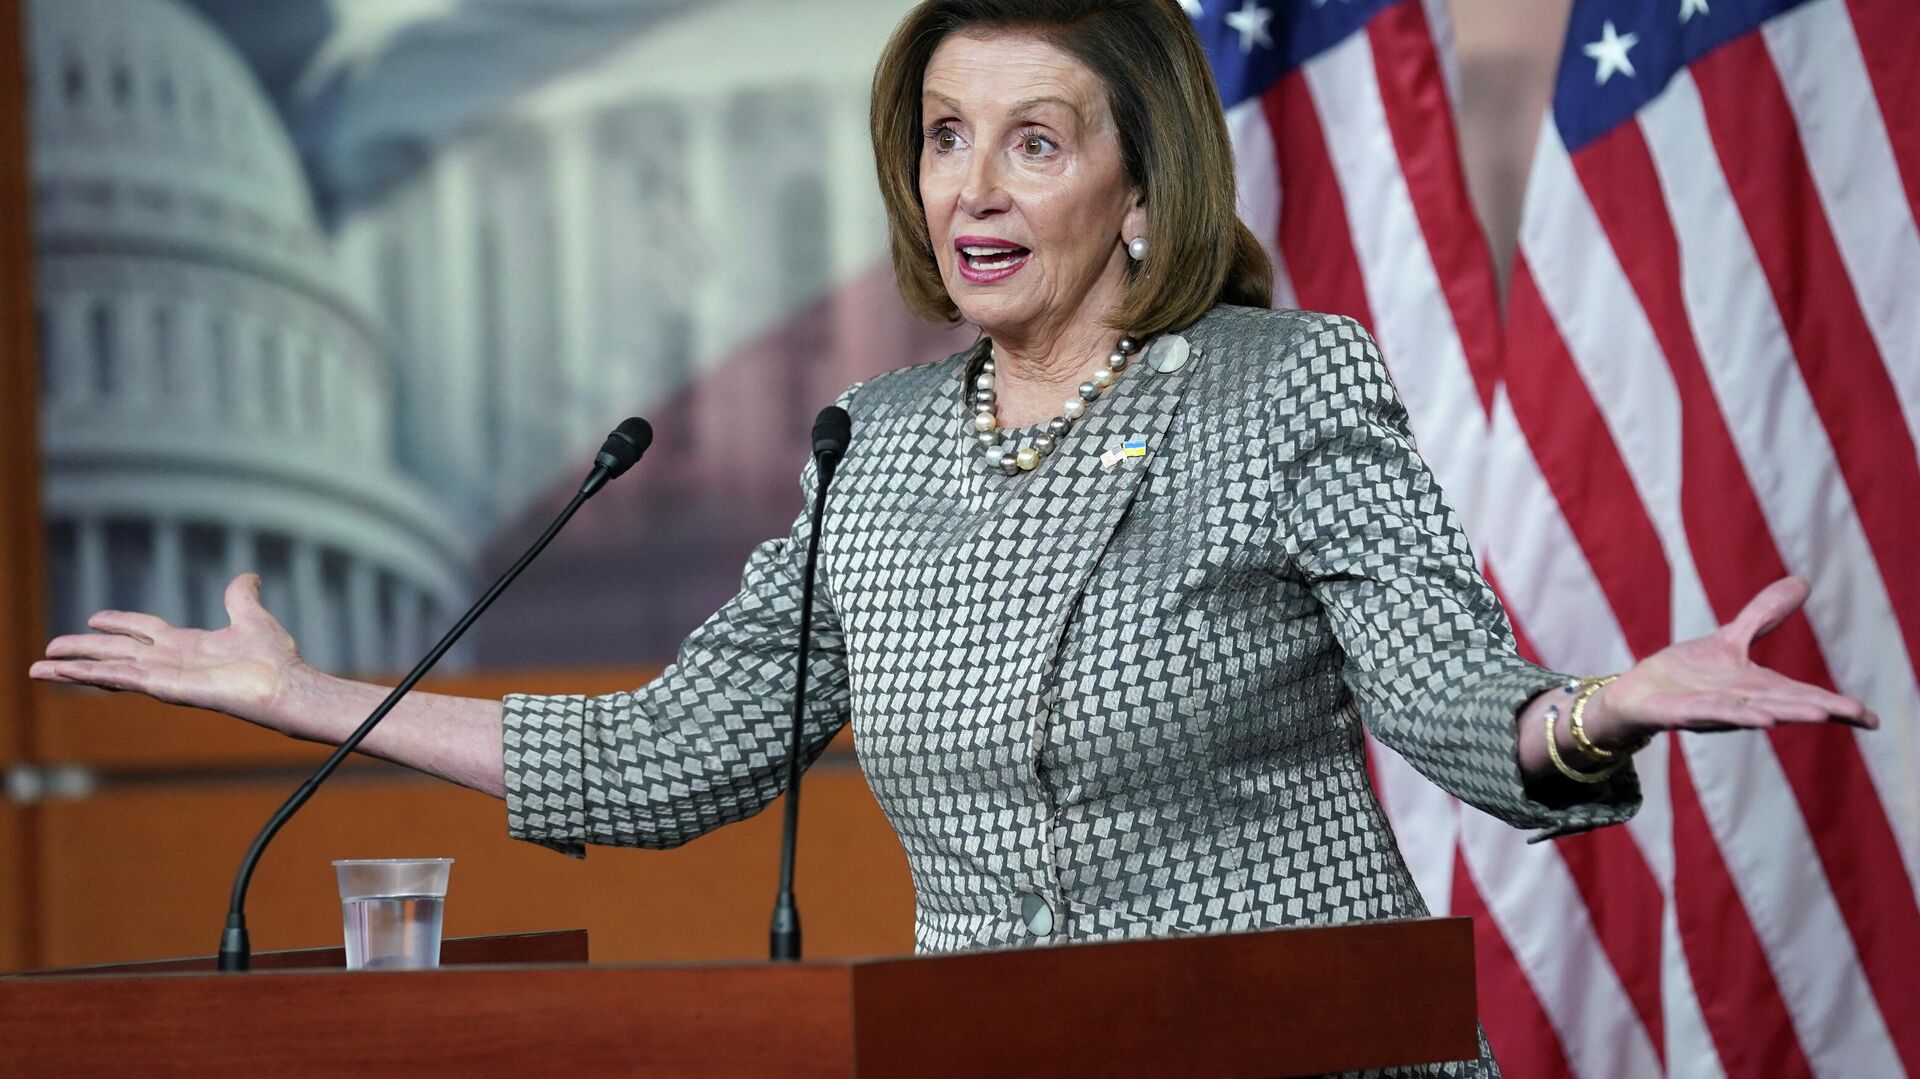 Speaker of the House Nancy Pelosi gestures as she speaks during a news conference at the U.S. Capitol in Washington March 3, 2022 - Sputnik International, 1920, 30.03.2022